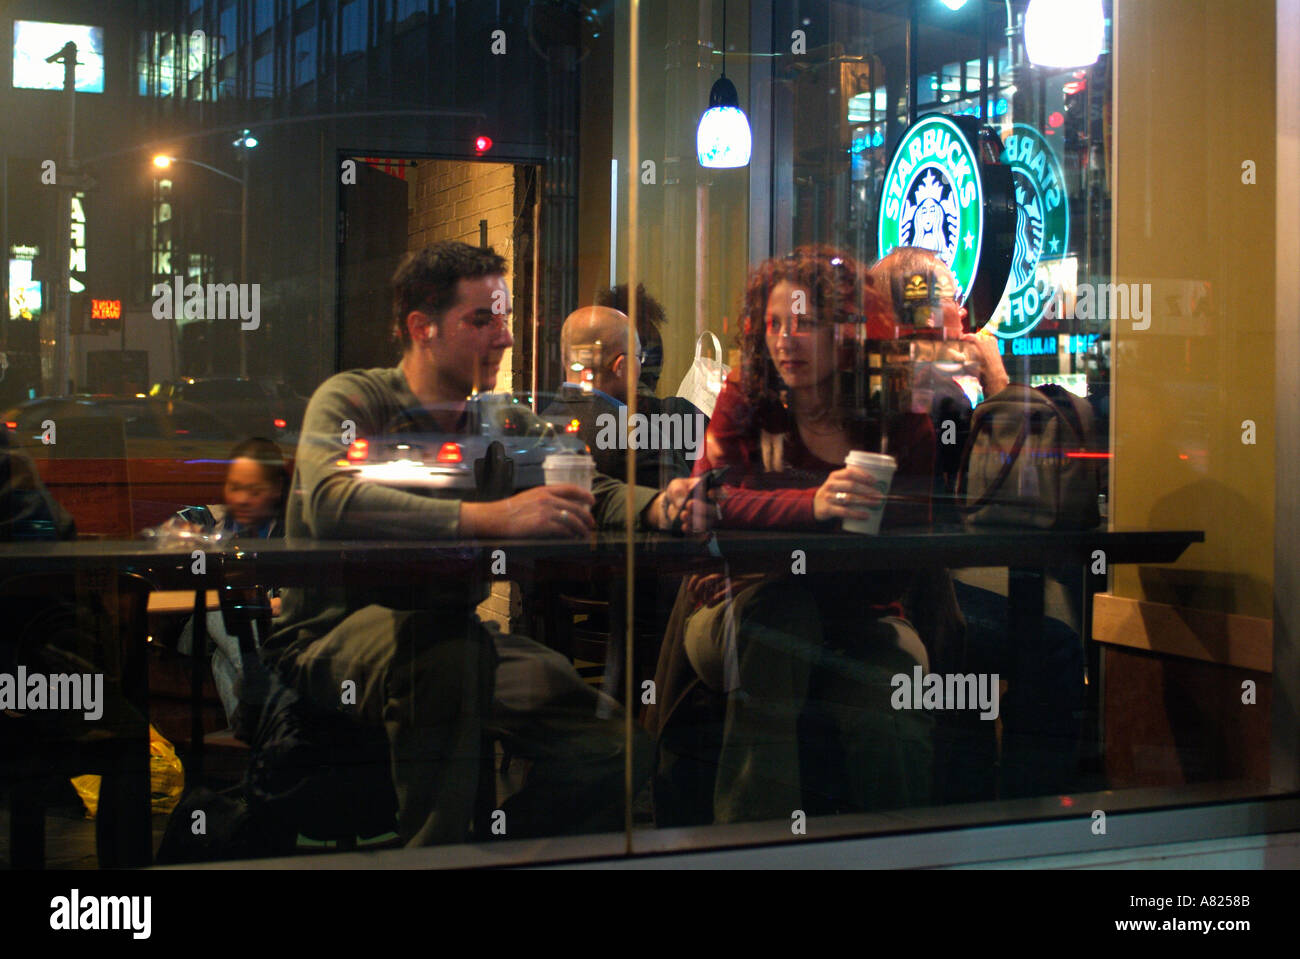 Couple Sitting in Starbucks café Manhattan New York City NY NYC United States of America USA US U S U S A Banque D'Images